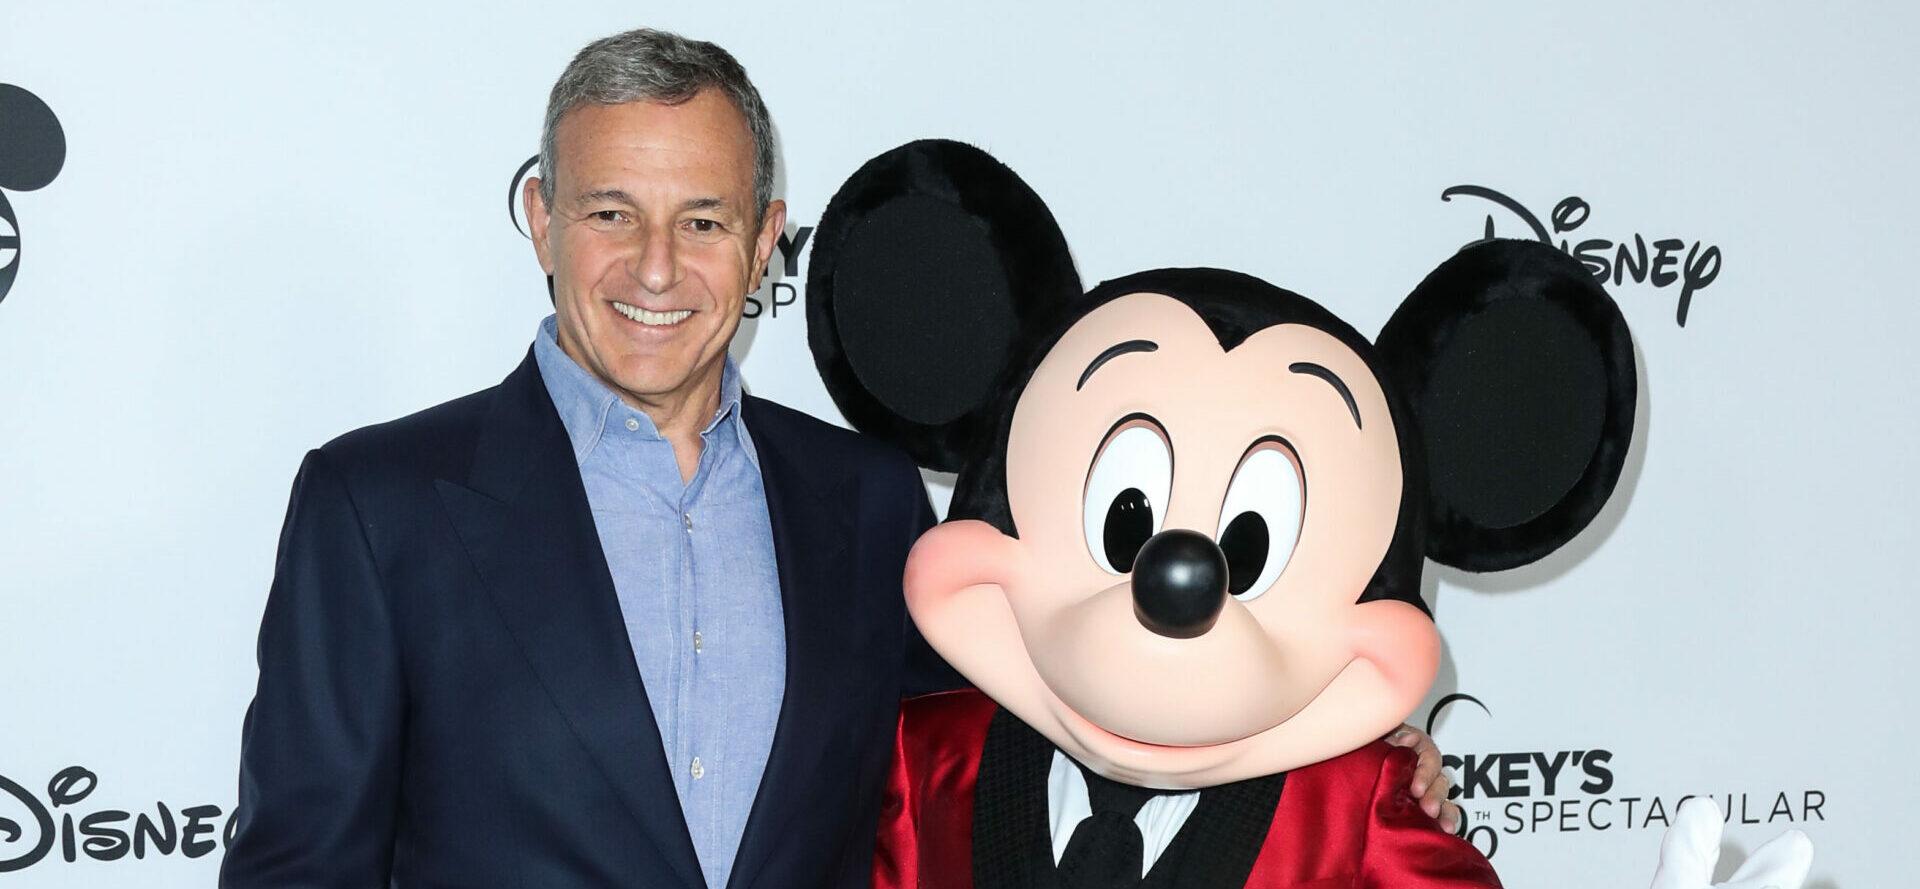 Shocking Possible Replacement For Disney CEO Bob Iger Revealed